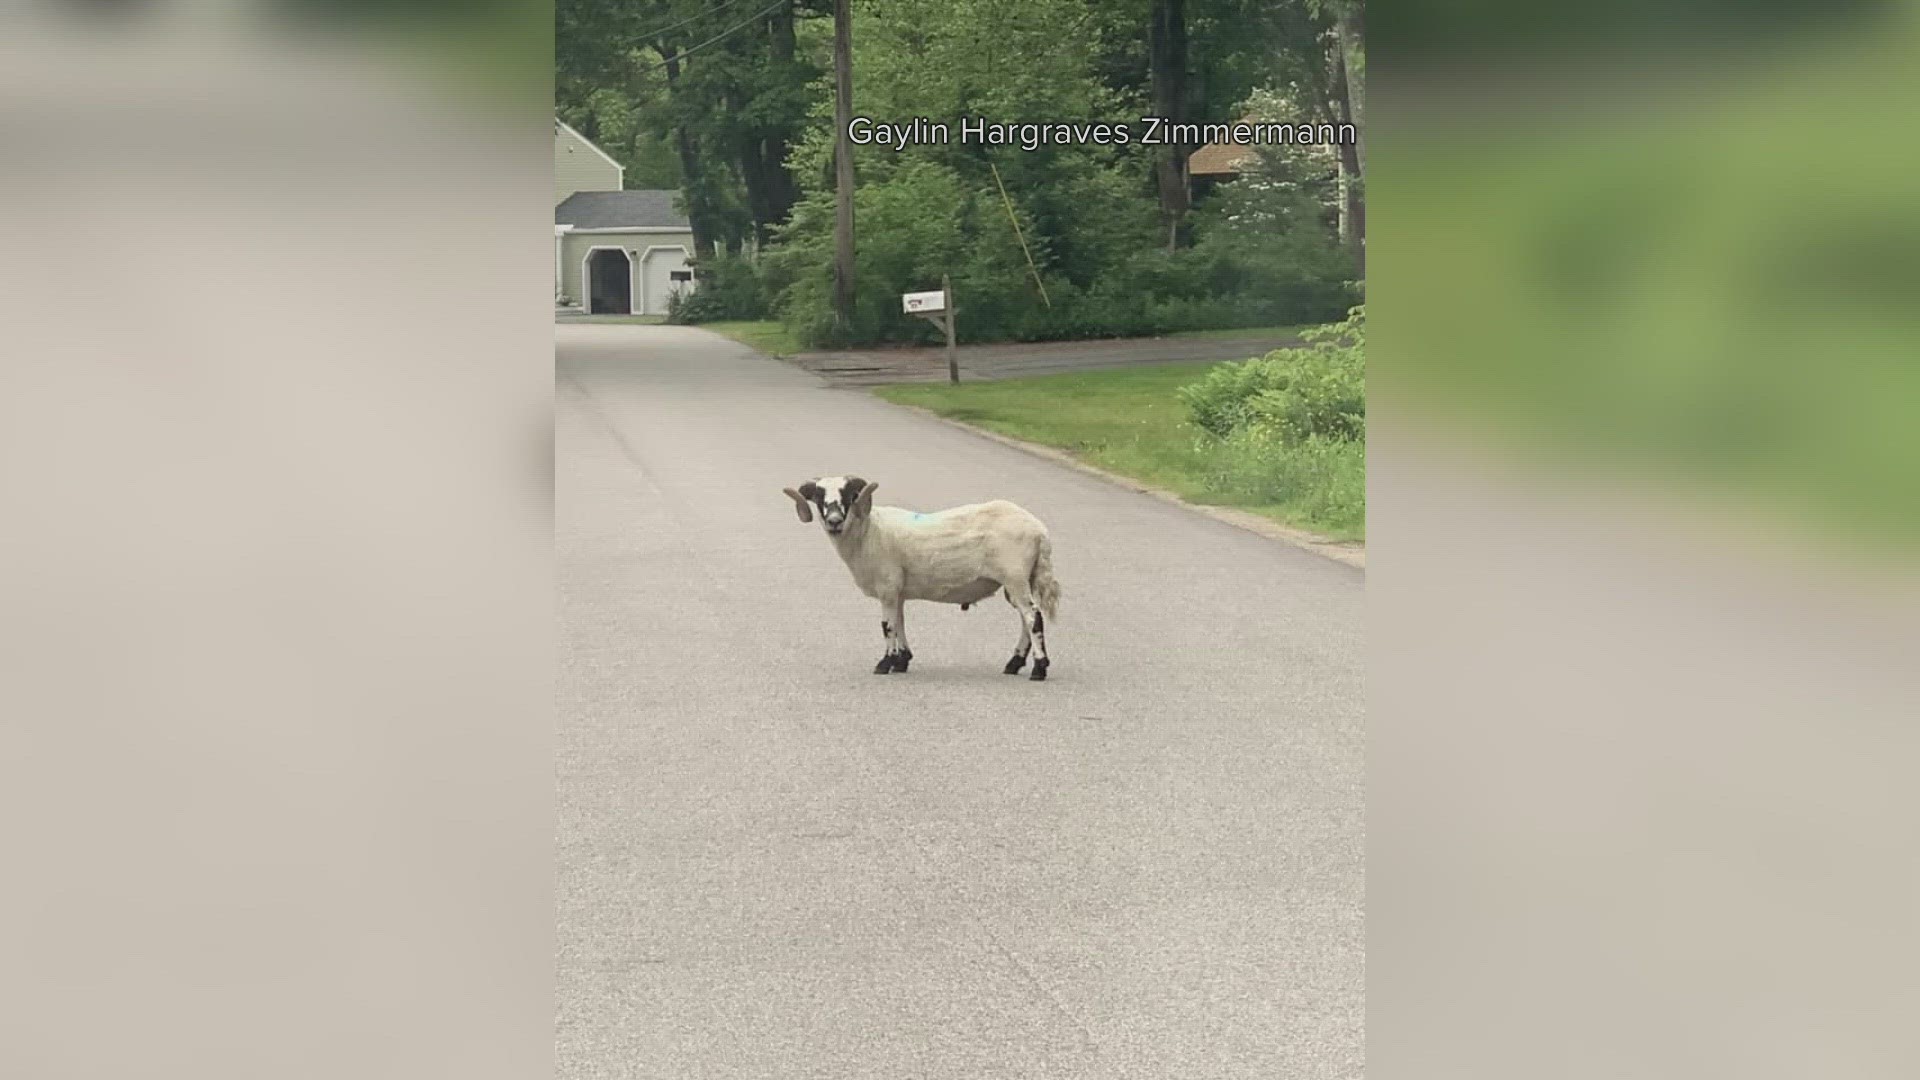 The ram reportedly got loose while its owner was attempting to relocate it to the mainland from Richmond Island.